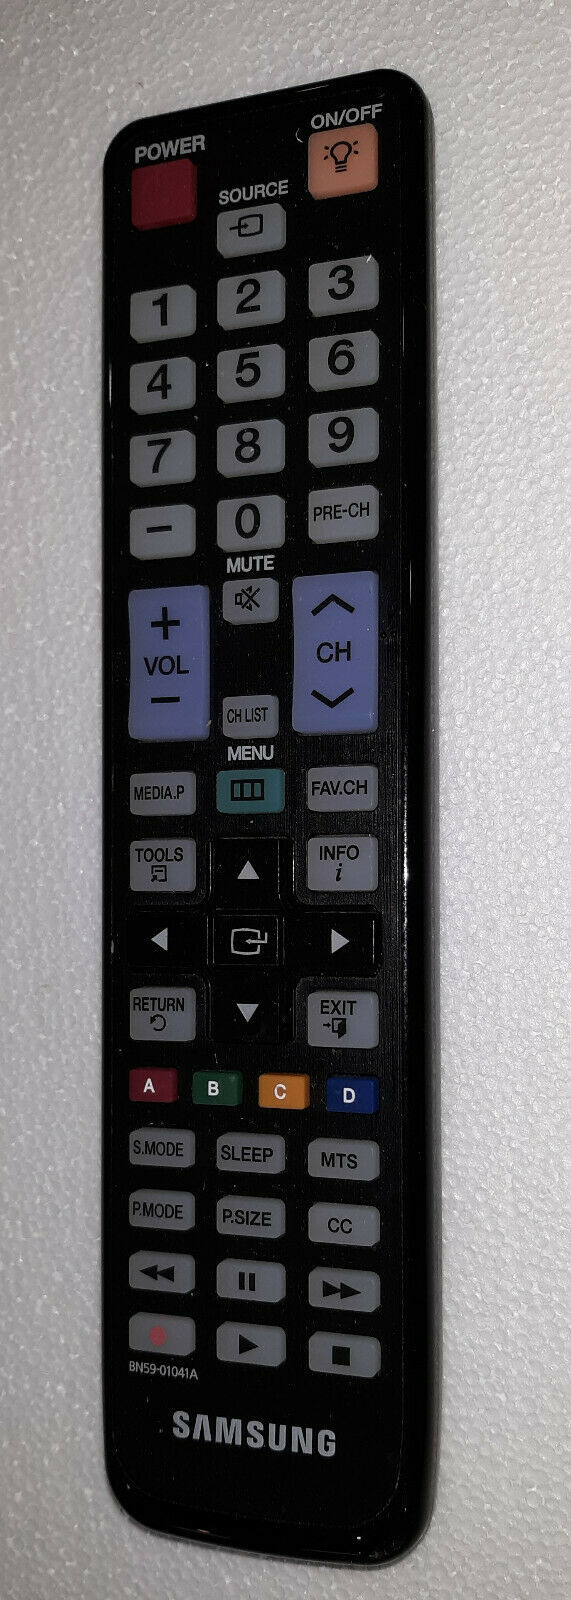 Primary image for 21EE88 SAMSUNG REMOTE CONTROL, BN59-01041A, VERY GOOD CONDITION